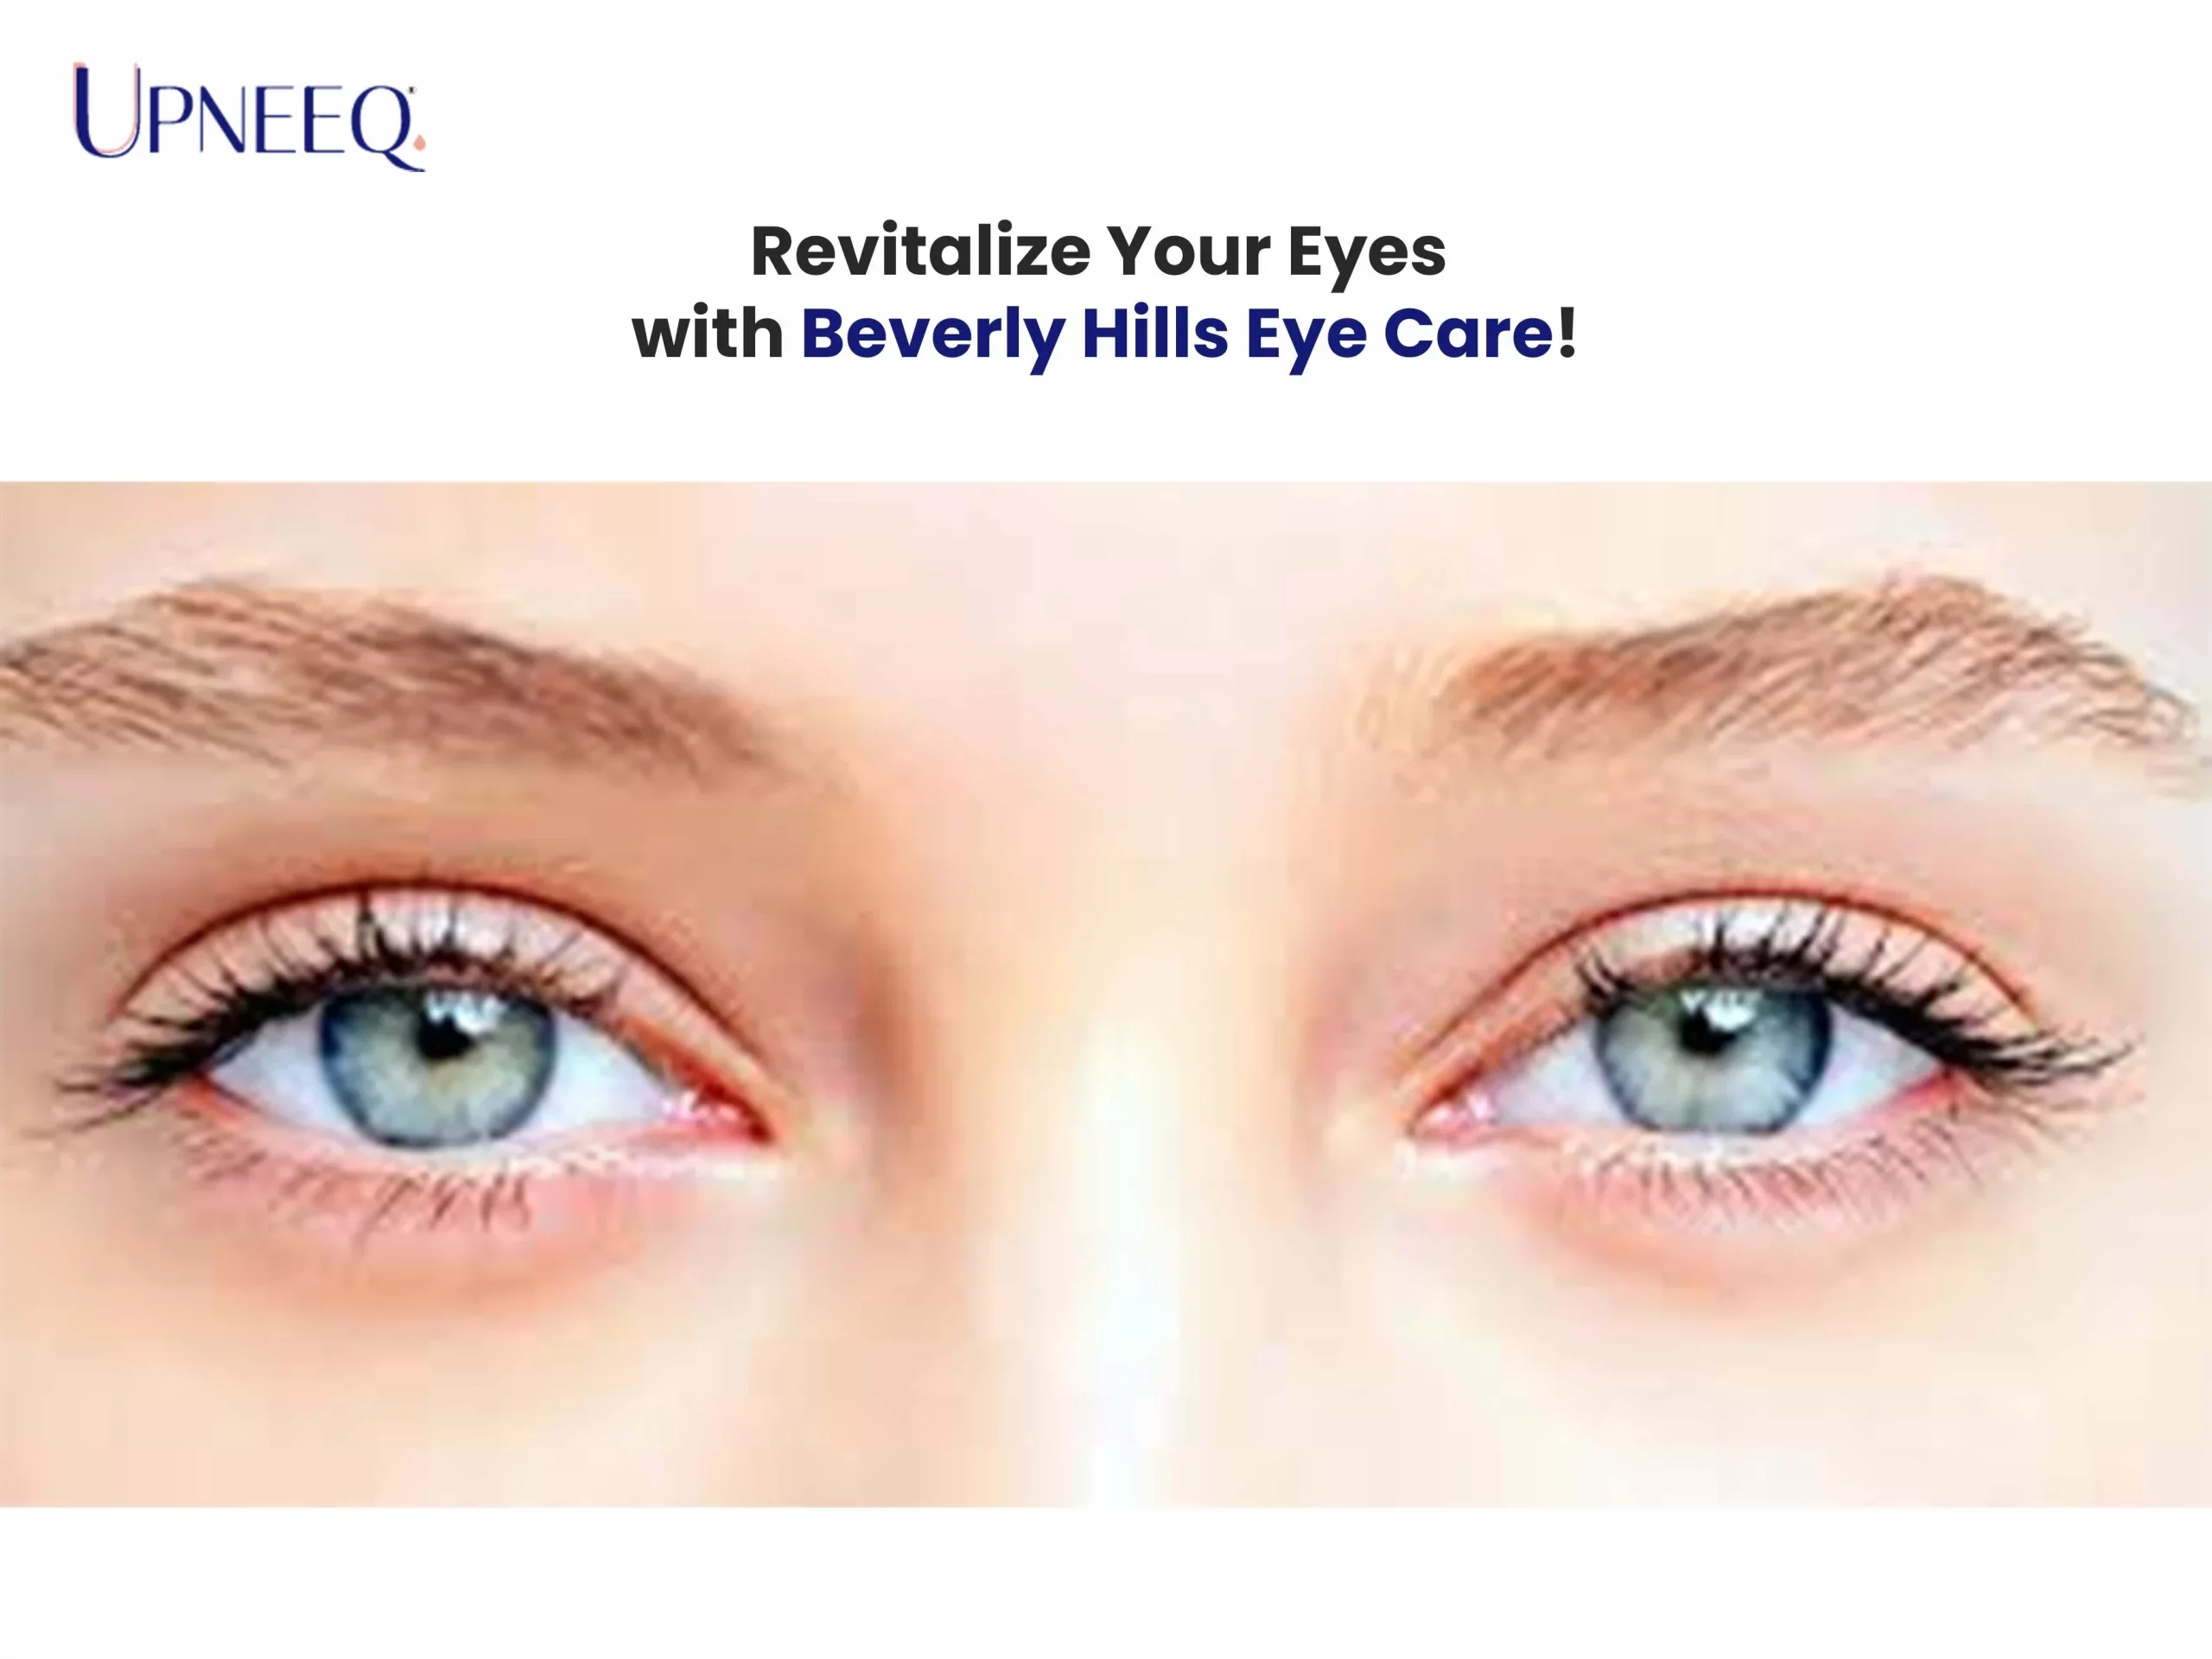 Revitalize Your Eyes with Beverly Hills Eye Care!